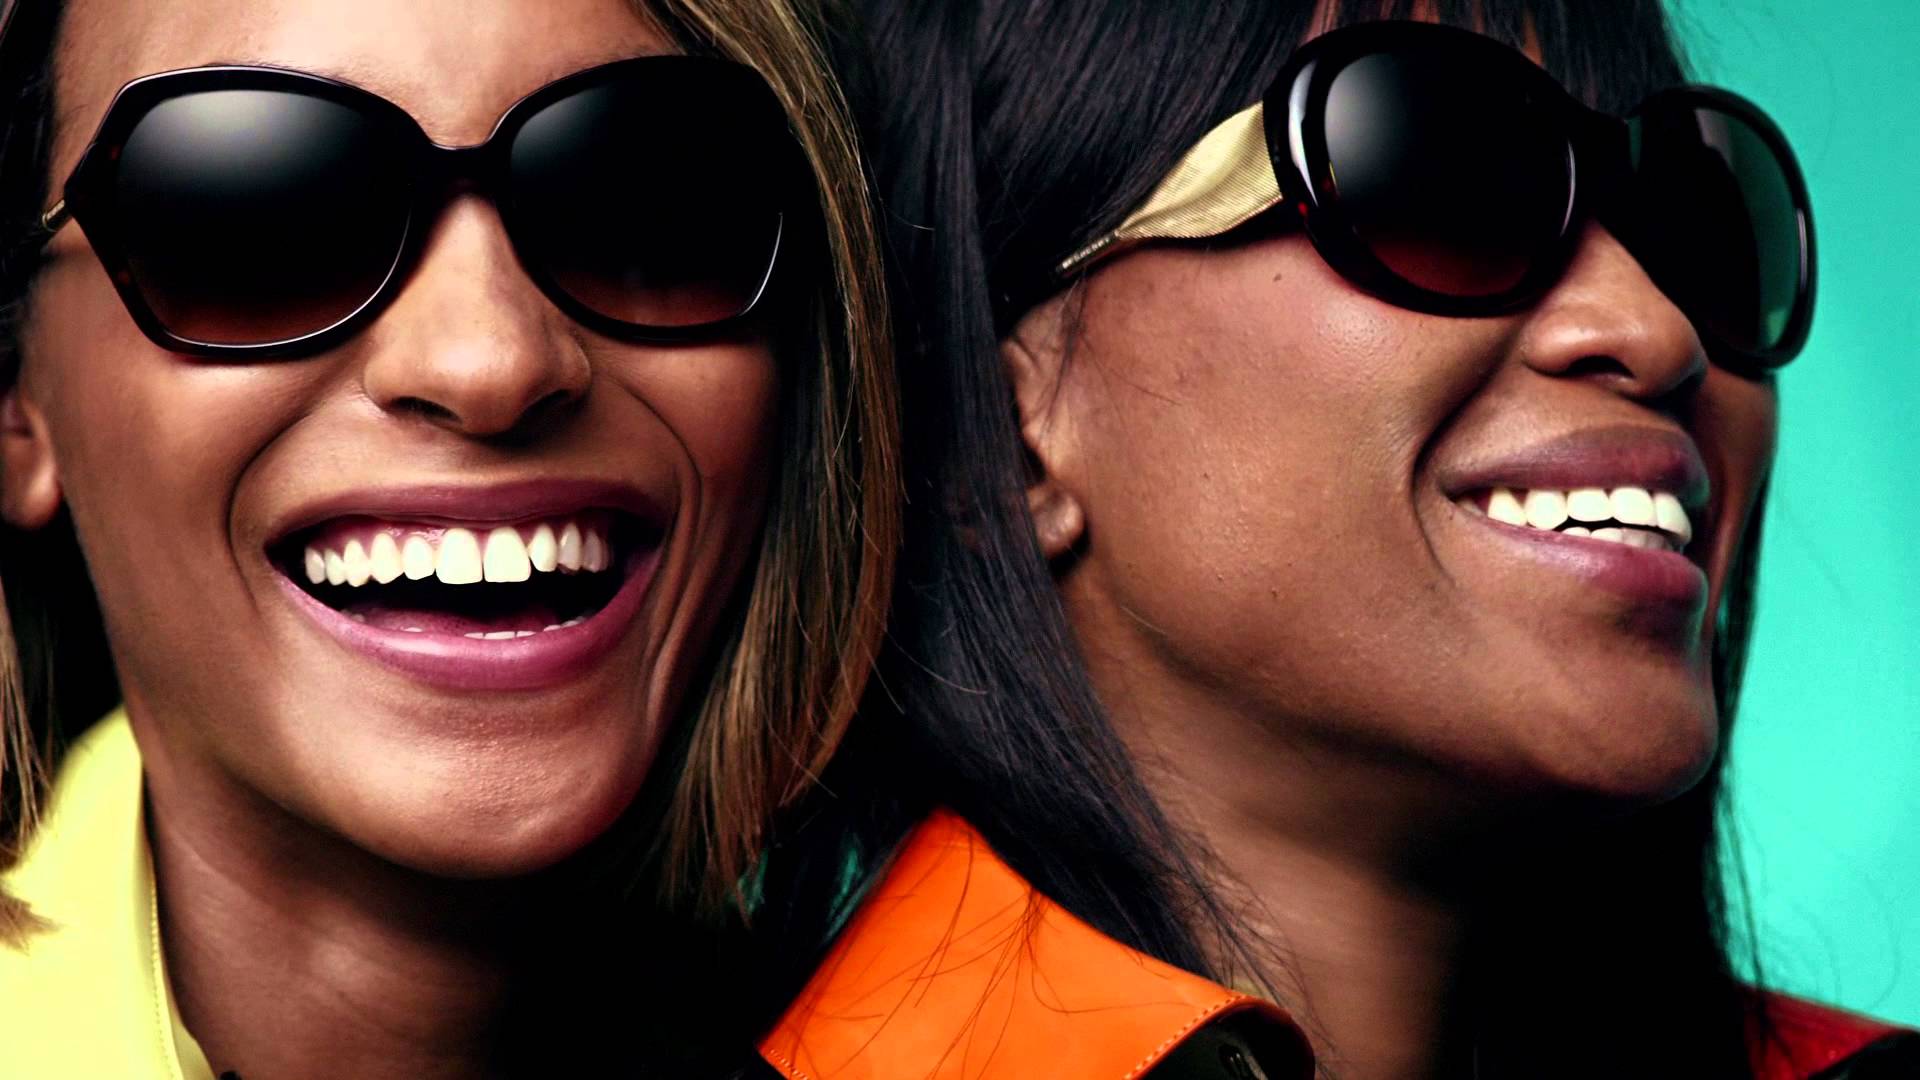 Burberry-Eyewear-Campaign-Jordan-Dunn-and-Naomi-Campbell-modelling-sunglasses-and-glasses